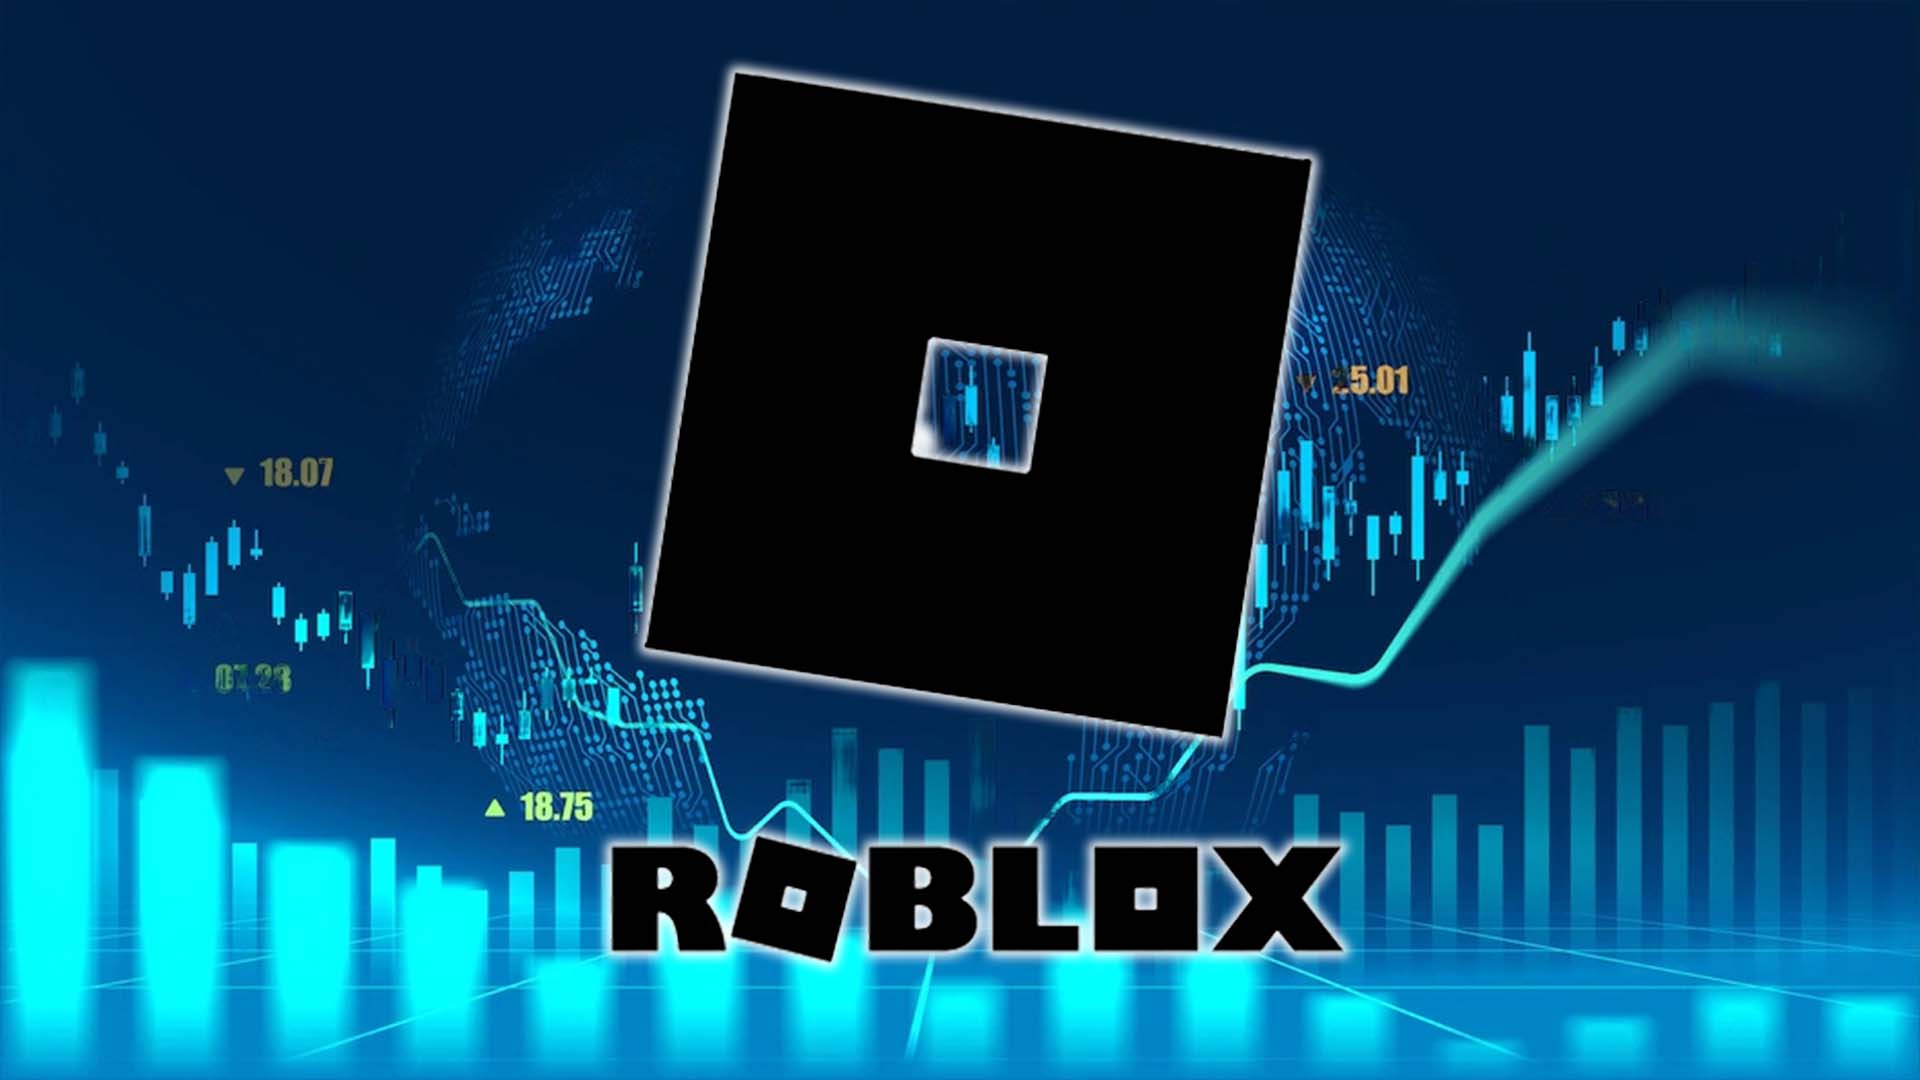 Roblox Corporation (RBLX) Company Profile & Overview - Stock Analysis